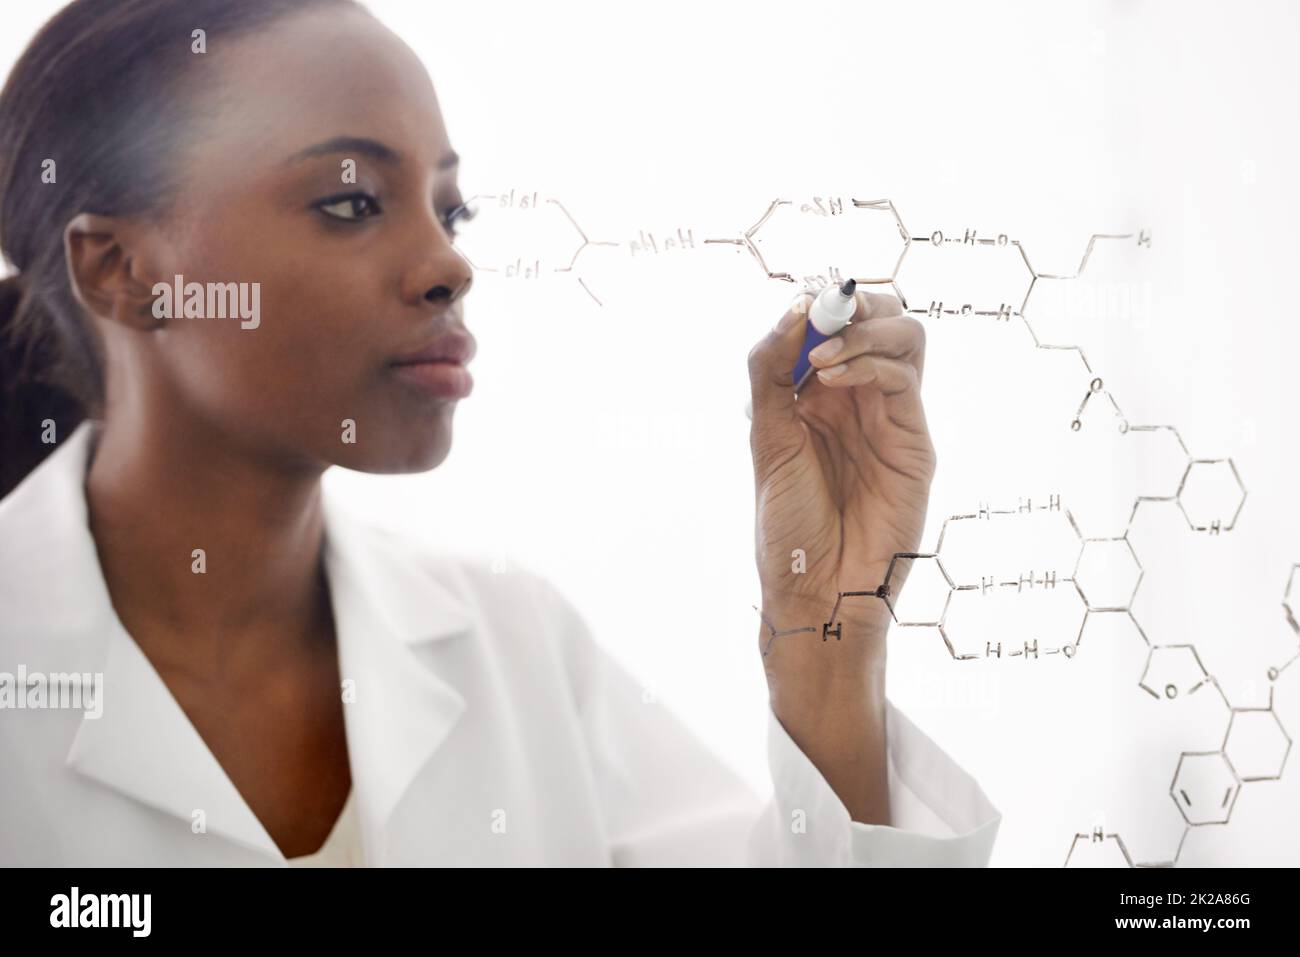 The world of molecules. Shot of a handsome male scientist drawing chemical bonds on a glass surface. Stock Photo